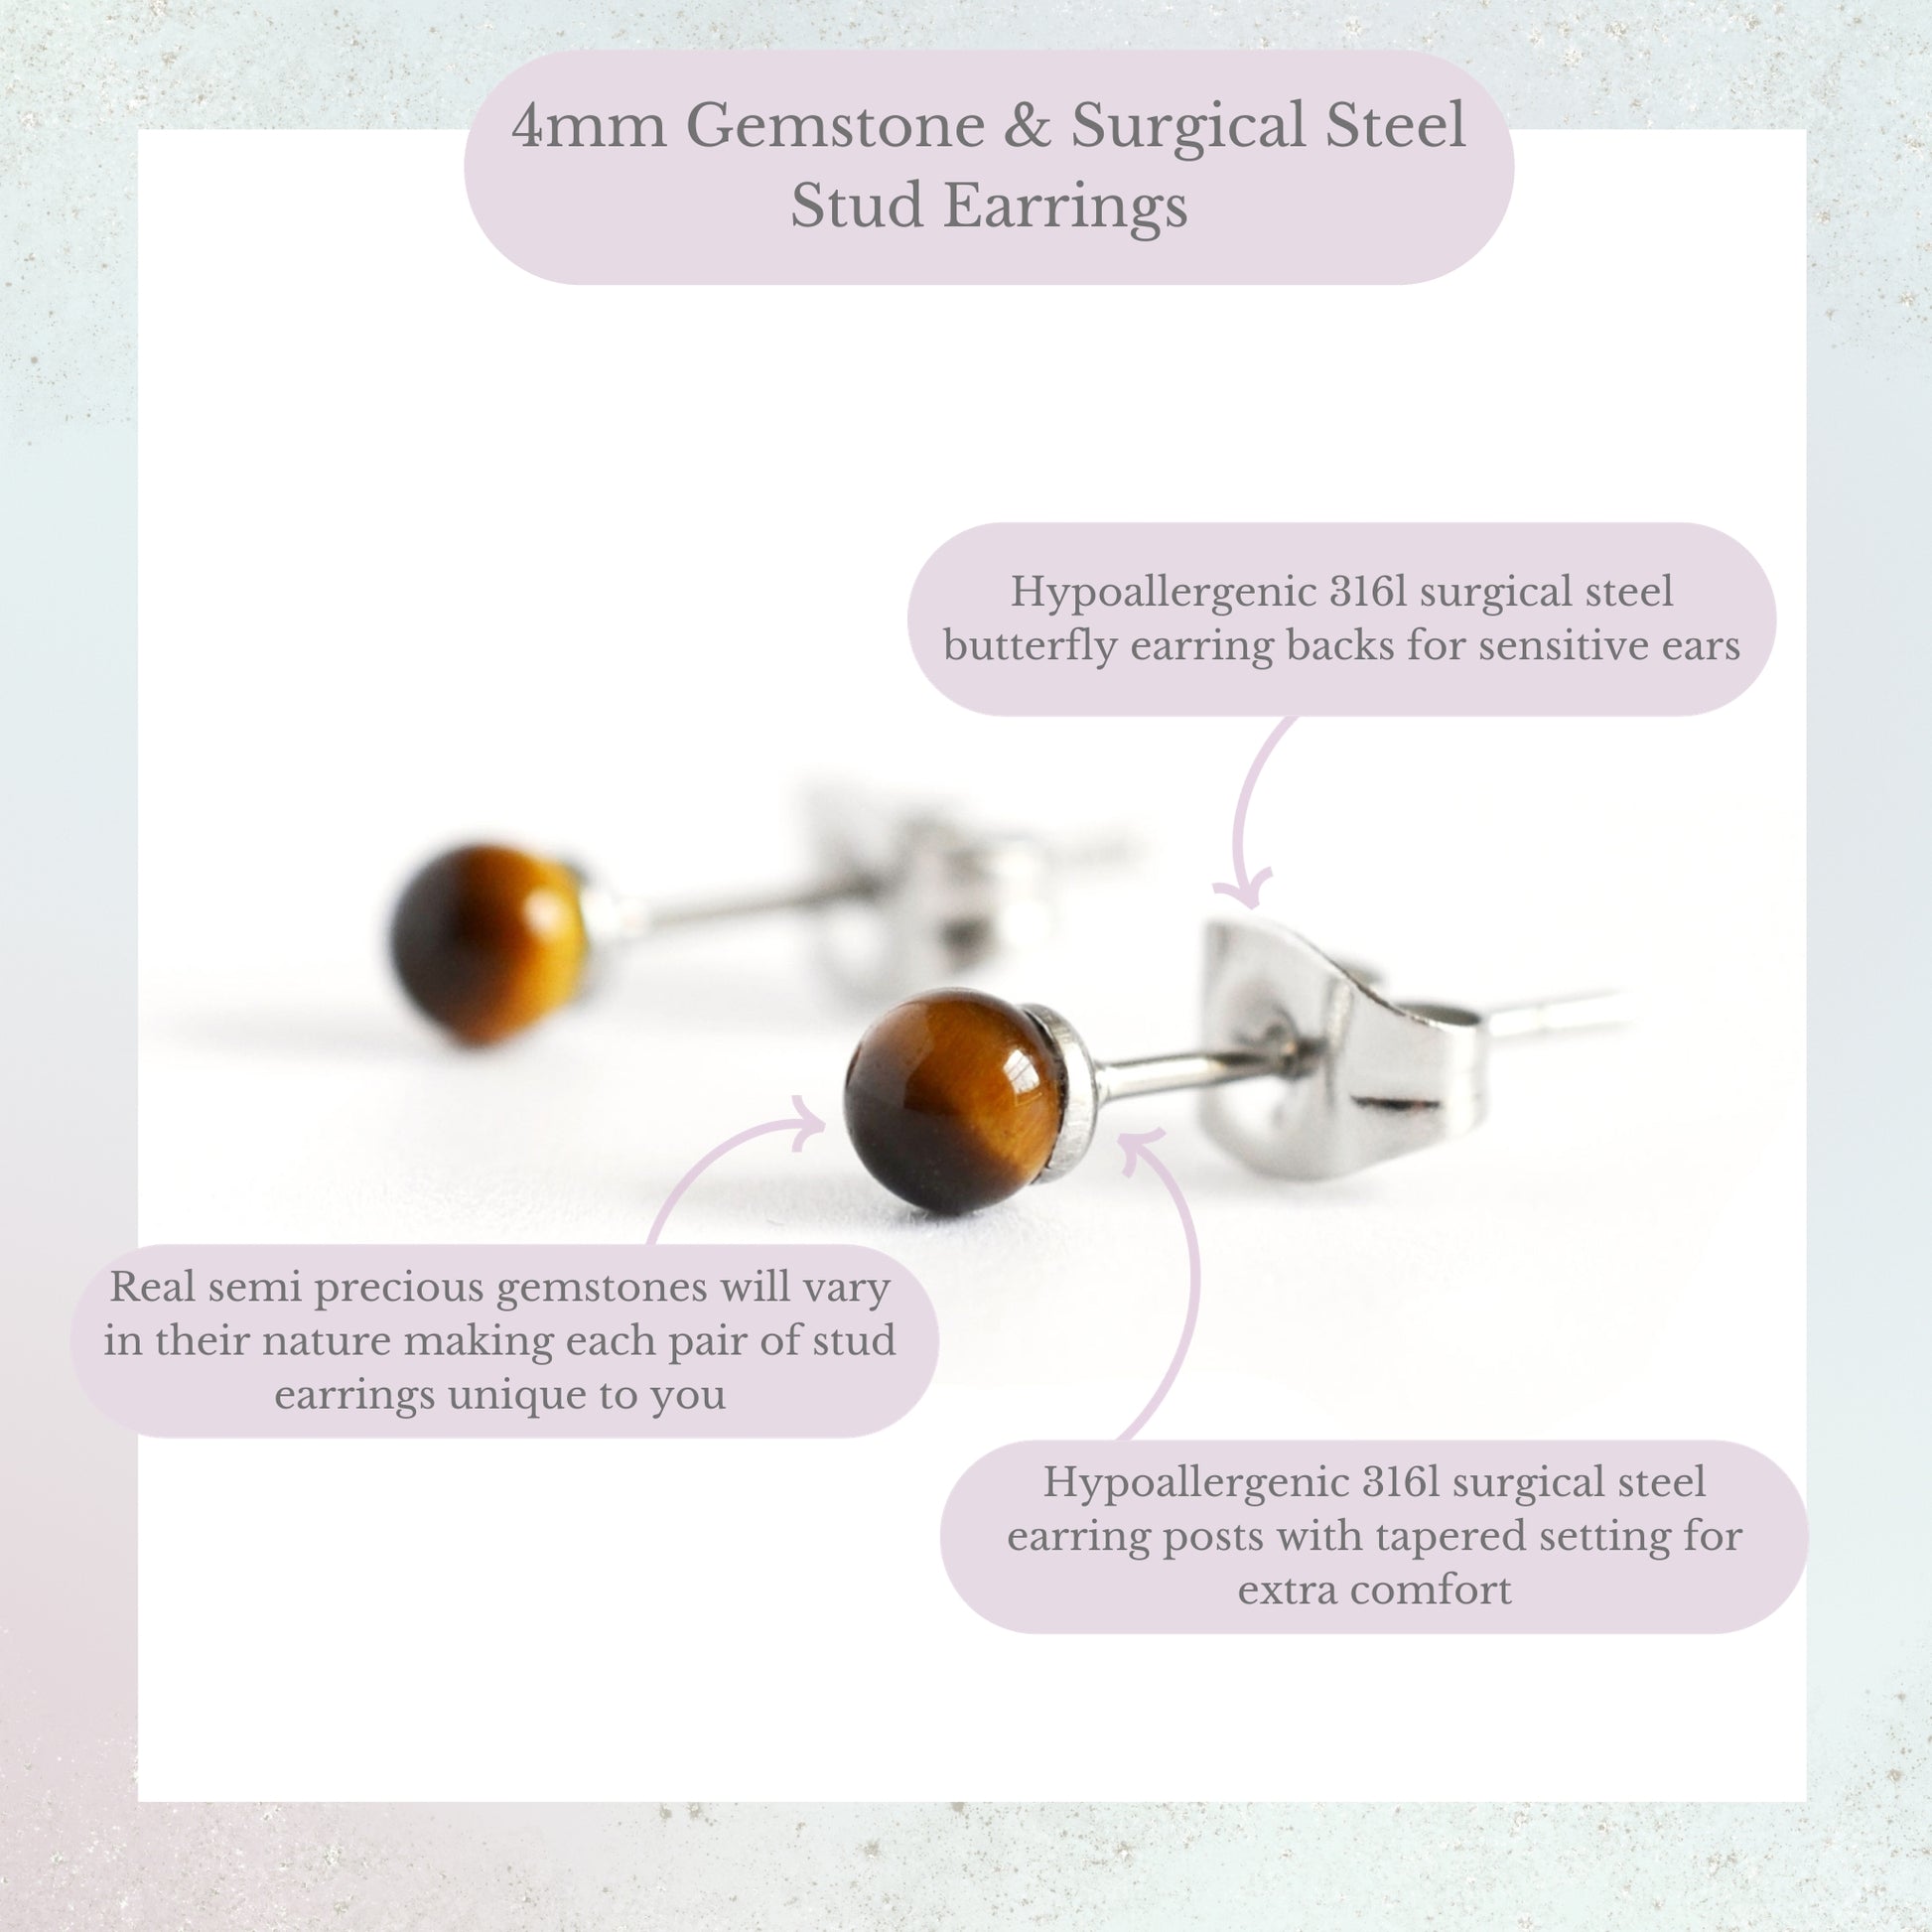 4mm gemstone & surgical steel stud earrings product information graphic